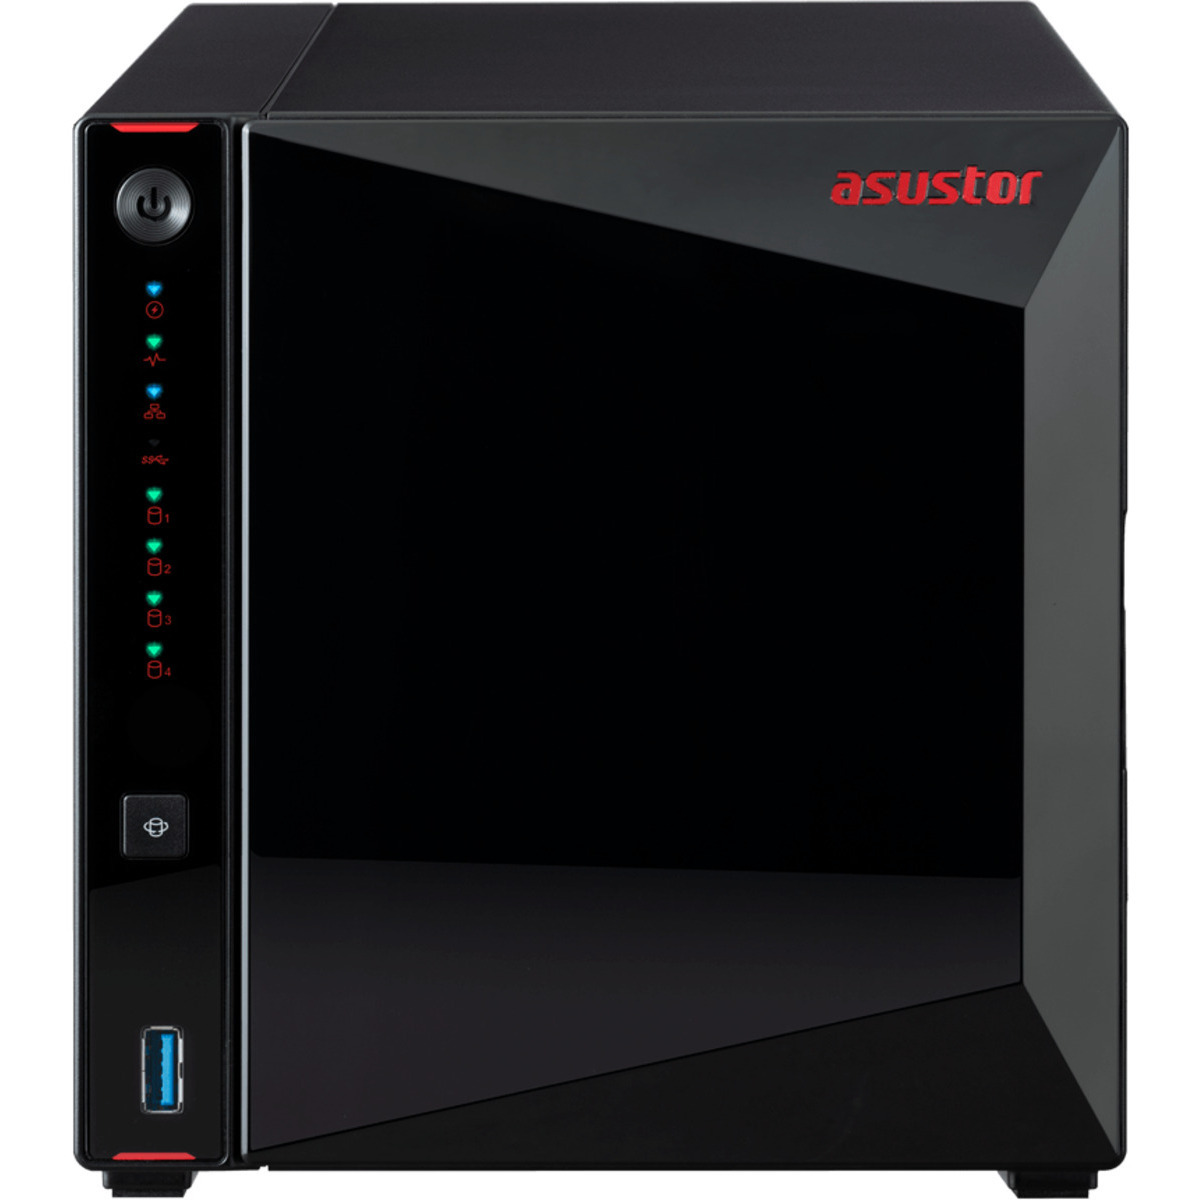 ASUSTOR AS5304T Nimbustor 48tb 4-Bay Desktop Multimedia / Power User / Business NAS - Network Attached Storage Device 4x12tb Seagate IronWolf Pro ST12000NT001 3.5 7200rpm SATA 6Gb/s HDD NAS Class Drives Installed - Burn-In Tested - ON SALE - FREE RAM UPGRADE AS5304T Nimbustor